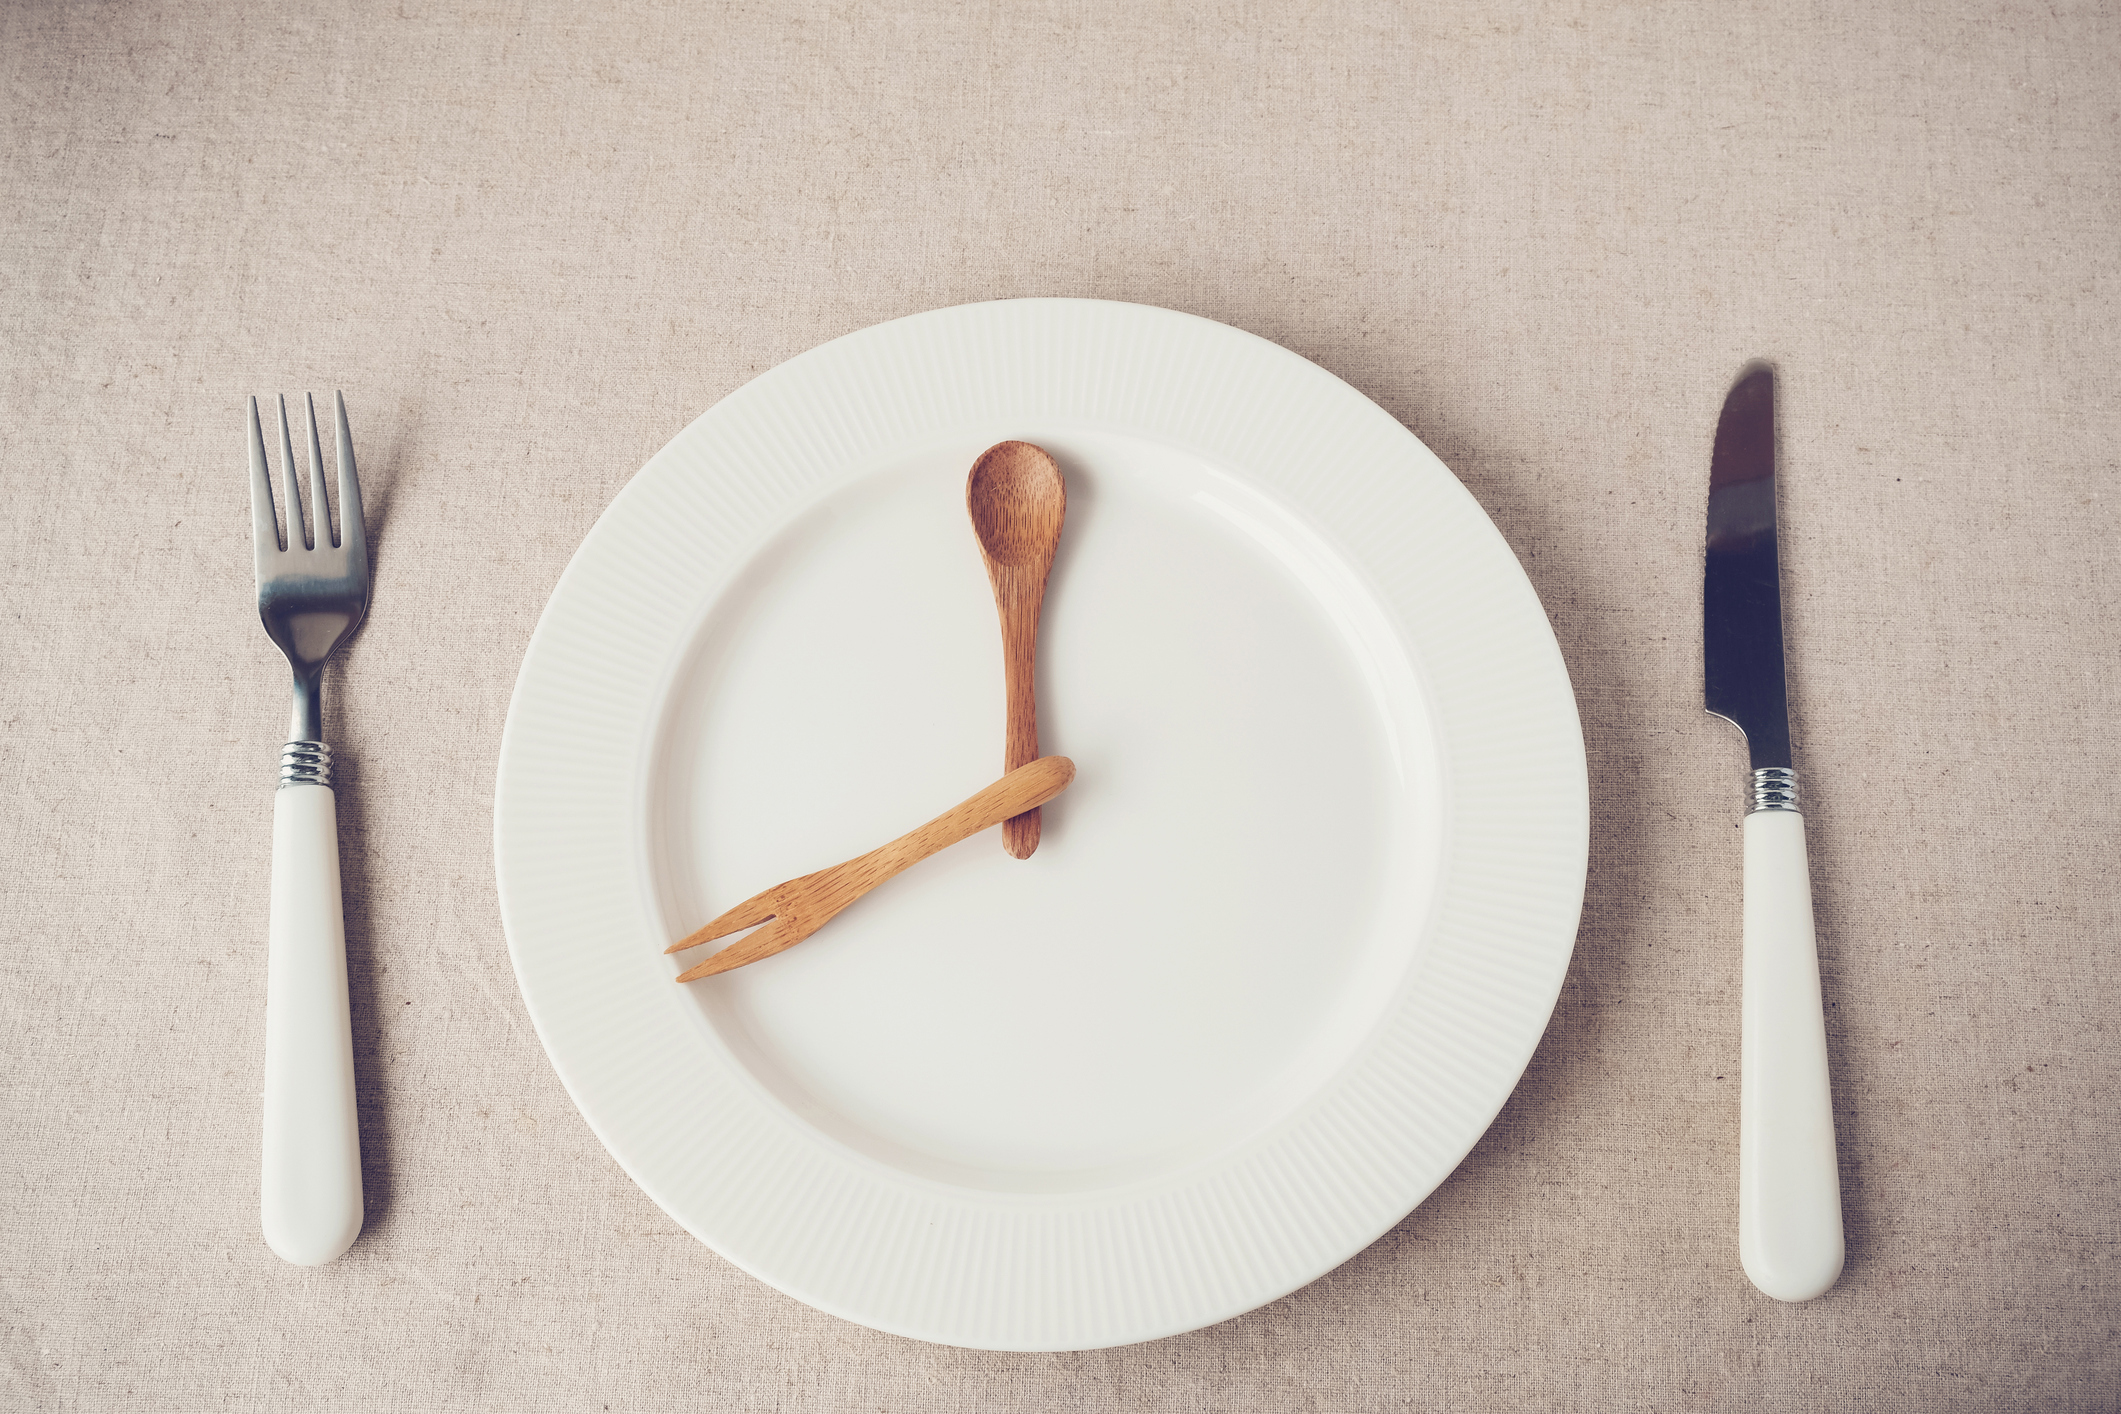 White plate with knife and fork representing hands of a clock.